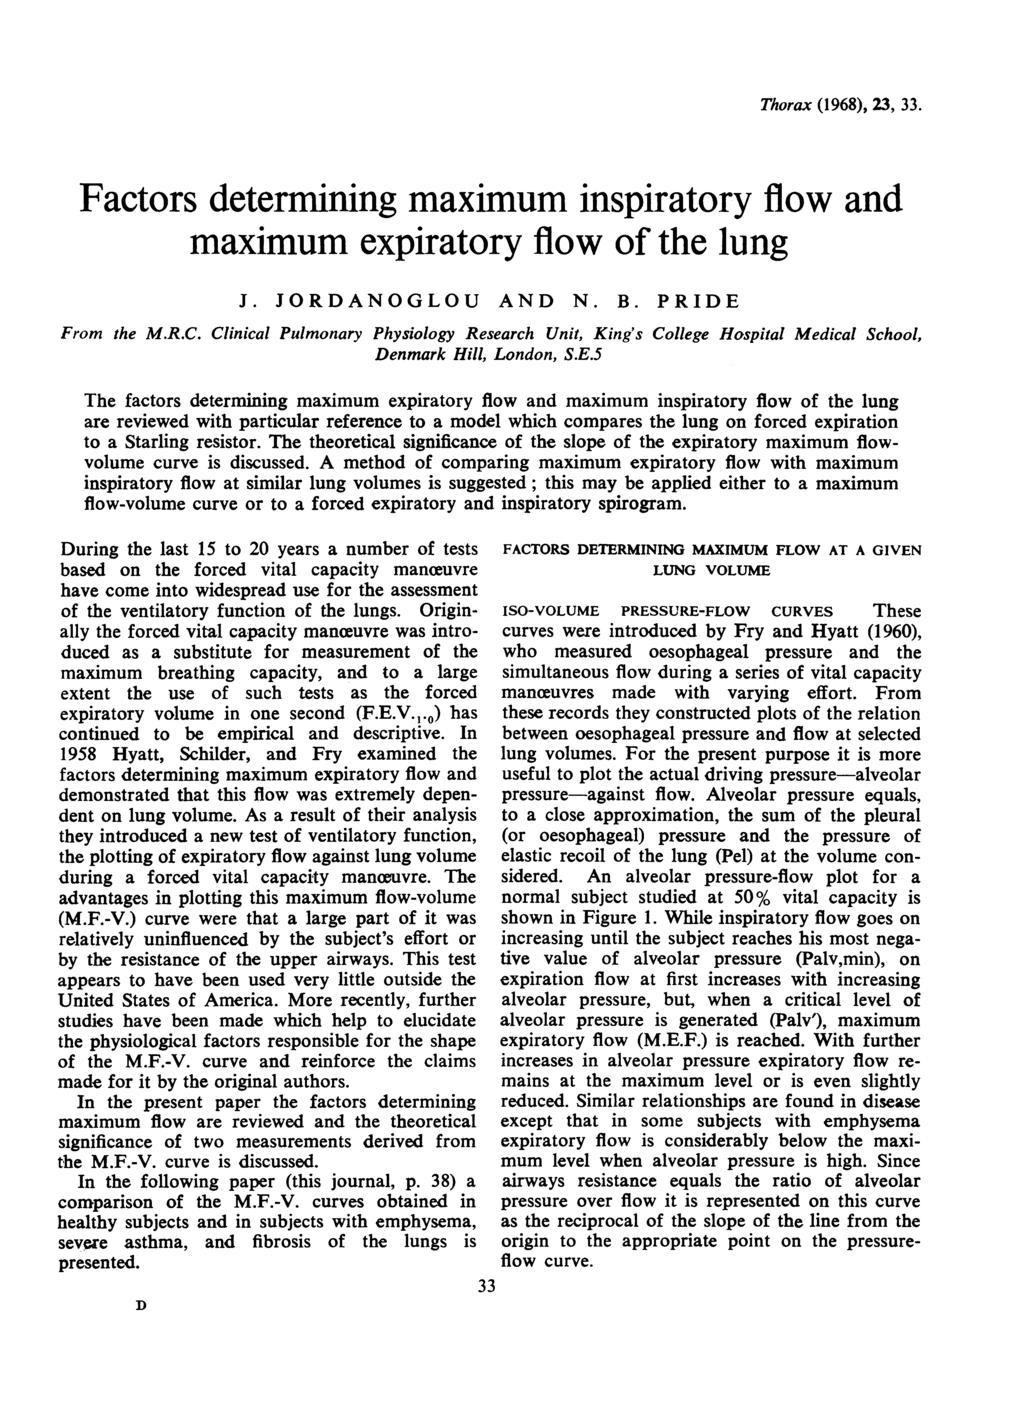 Thorax (1968), 23, 33. Factors determining maximum inspiratory flow and maximum expiratory flow of the lung J. JORDANOGLOU AND N. B. PRIDE From the M.R.C.